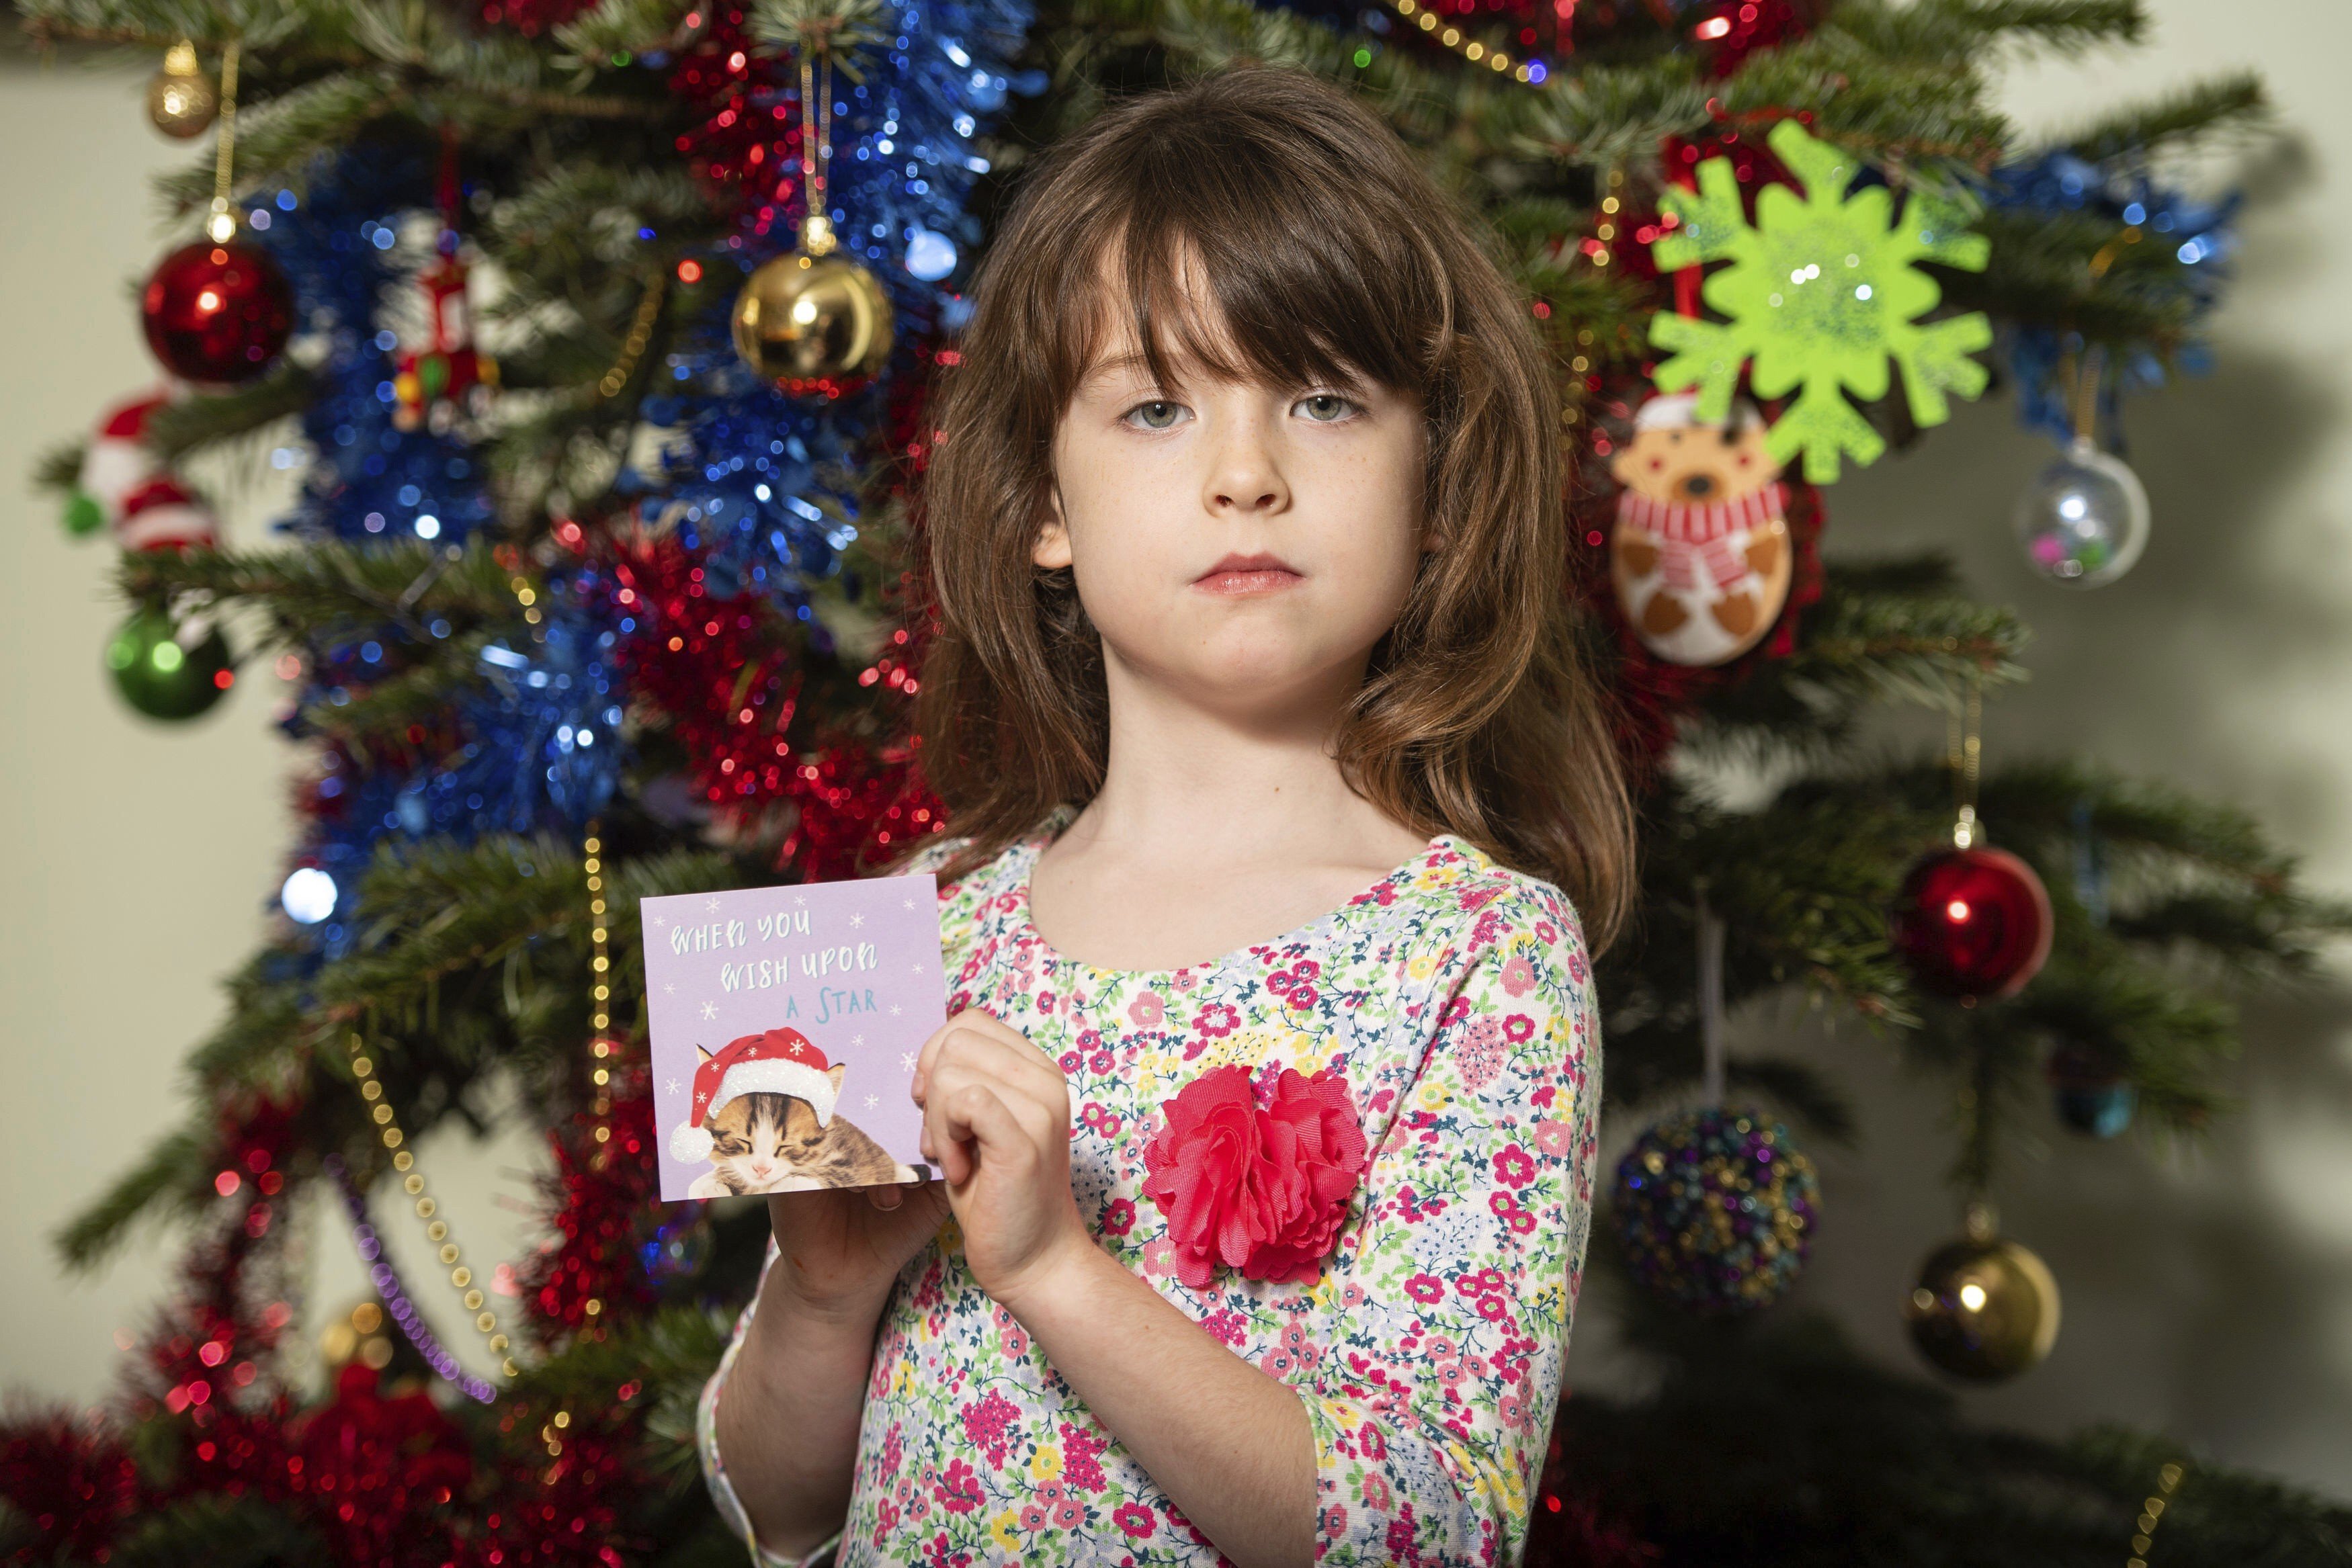 Florence Widdicombe, six, found the message in a charity card from the British retailer. Photo: PA via AP